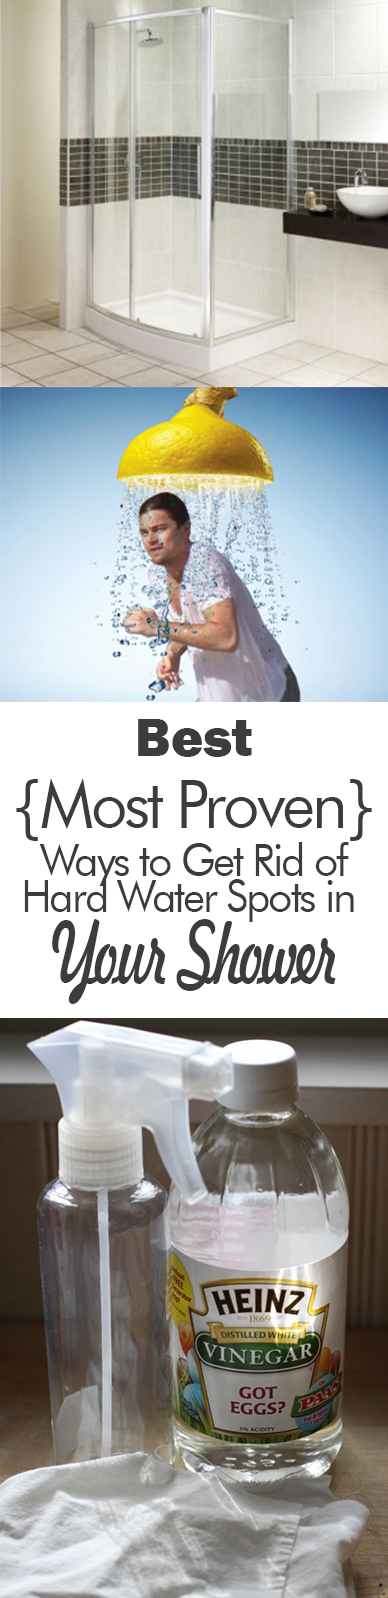 Best {Most Proven} Ways to Get Rid of Hard Water Spots in Your Shower